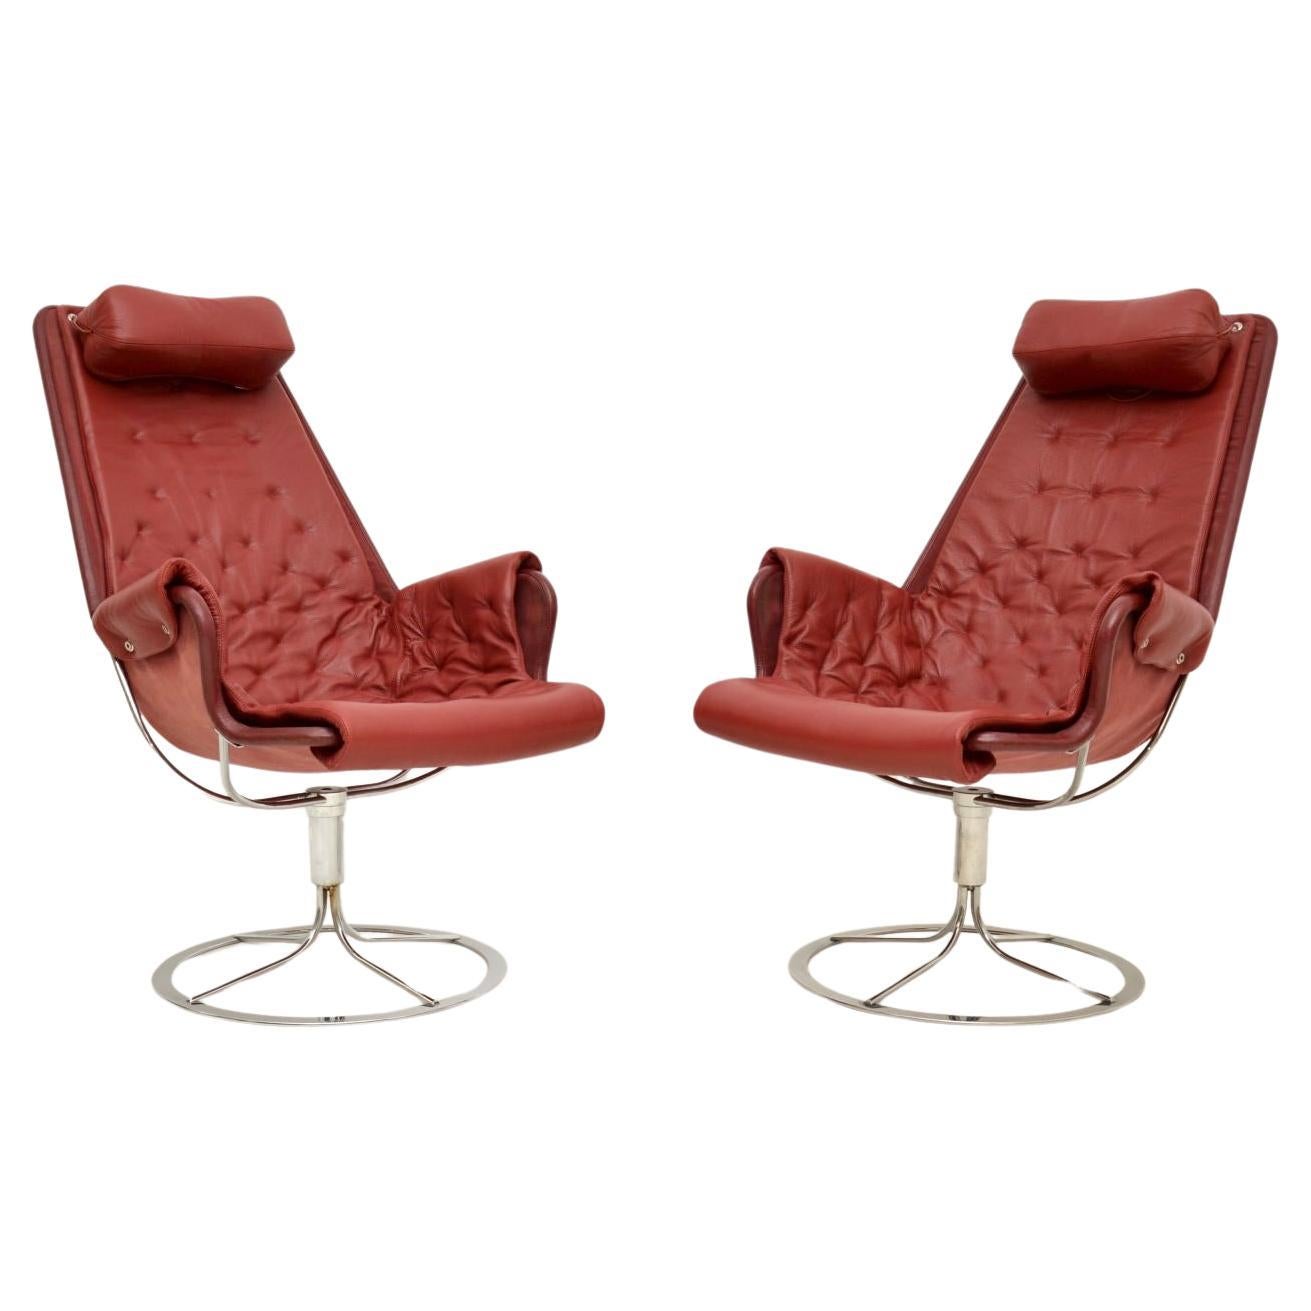 Pair of Vintage Jetson Swivel Armchairs by Bruno Mathsson for Dux